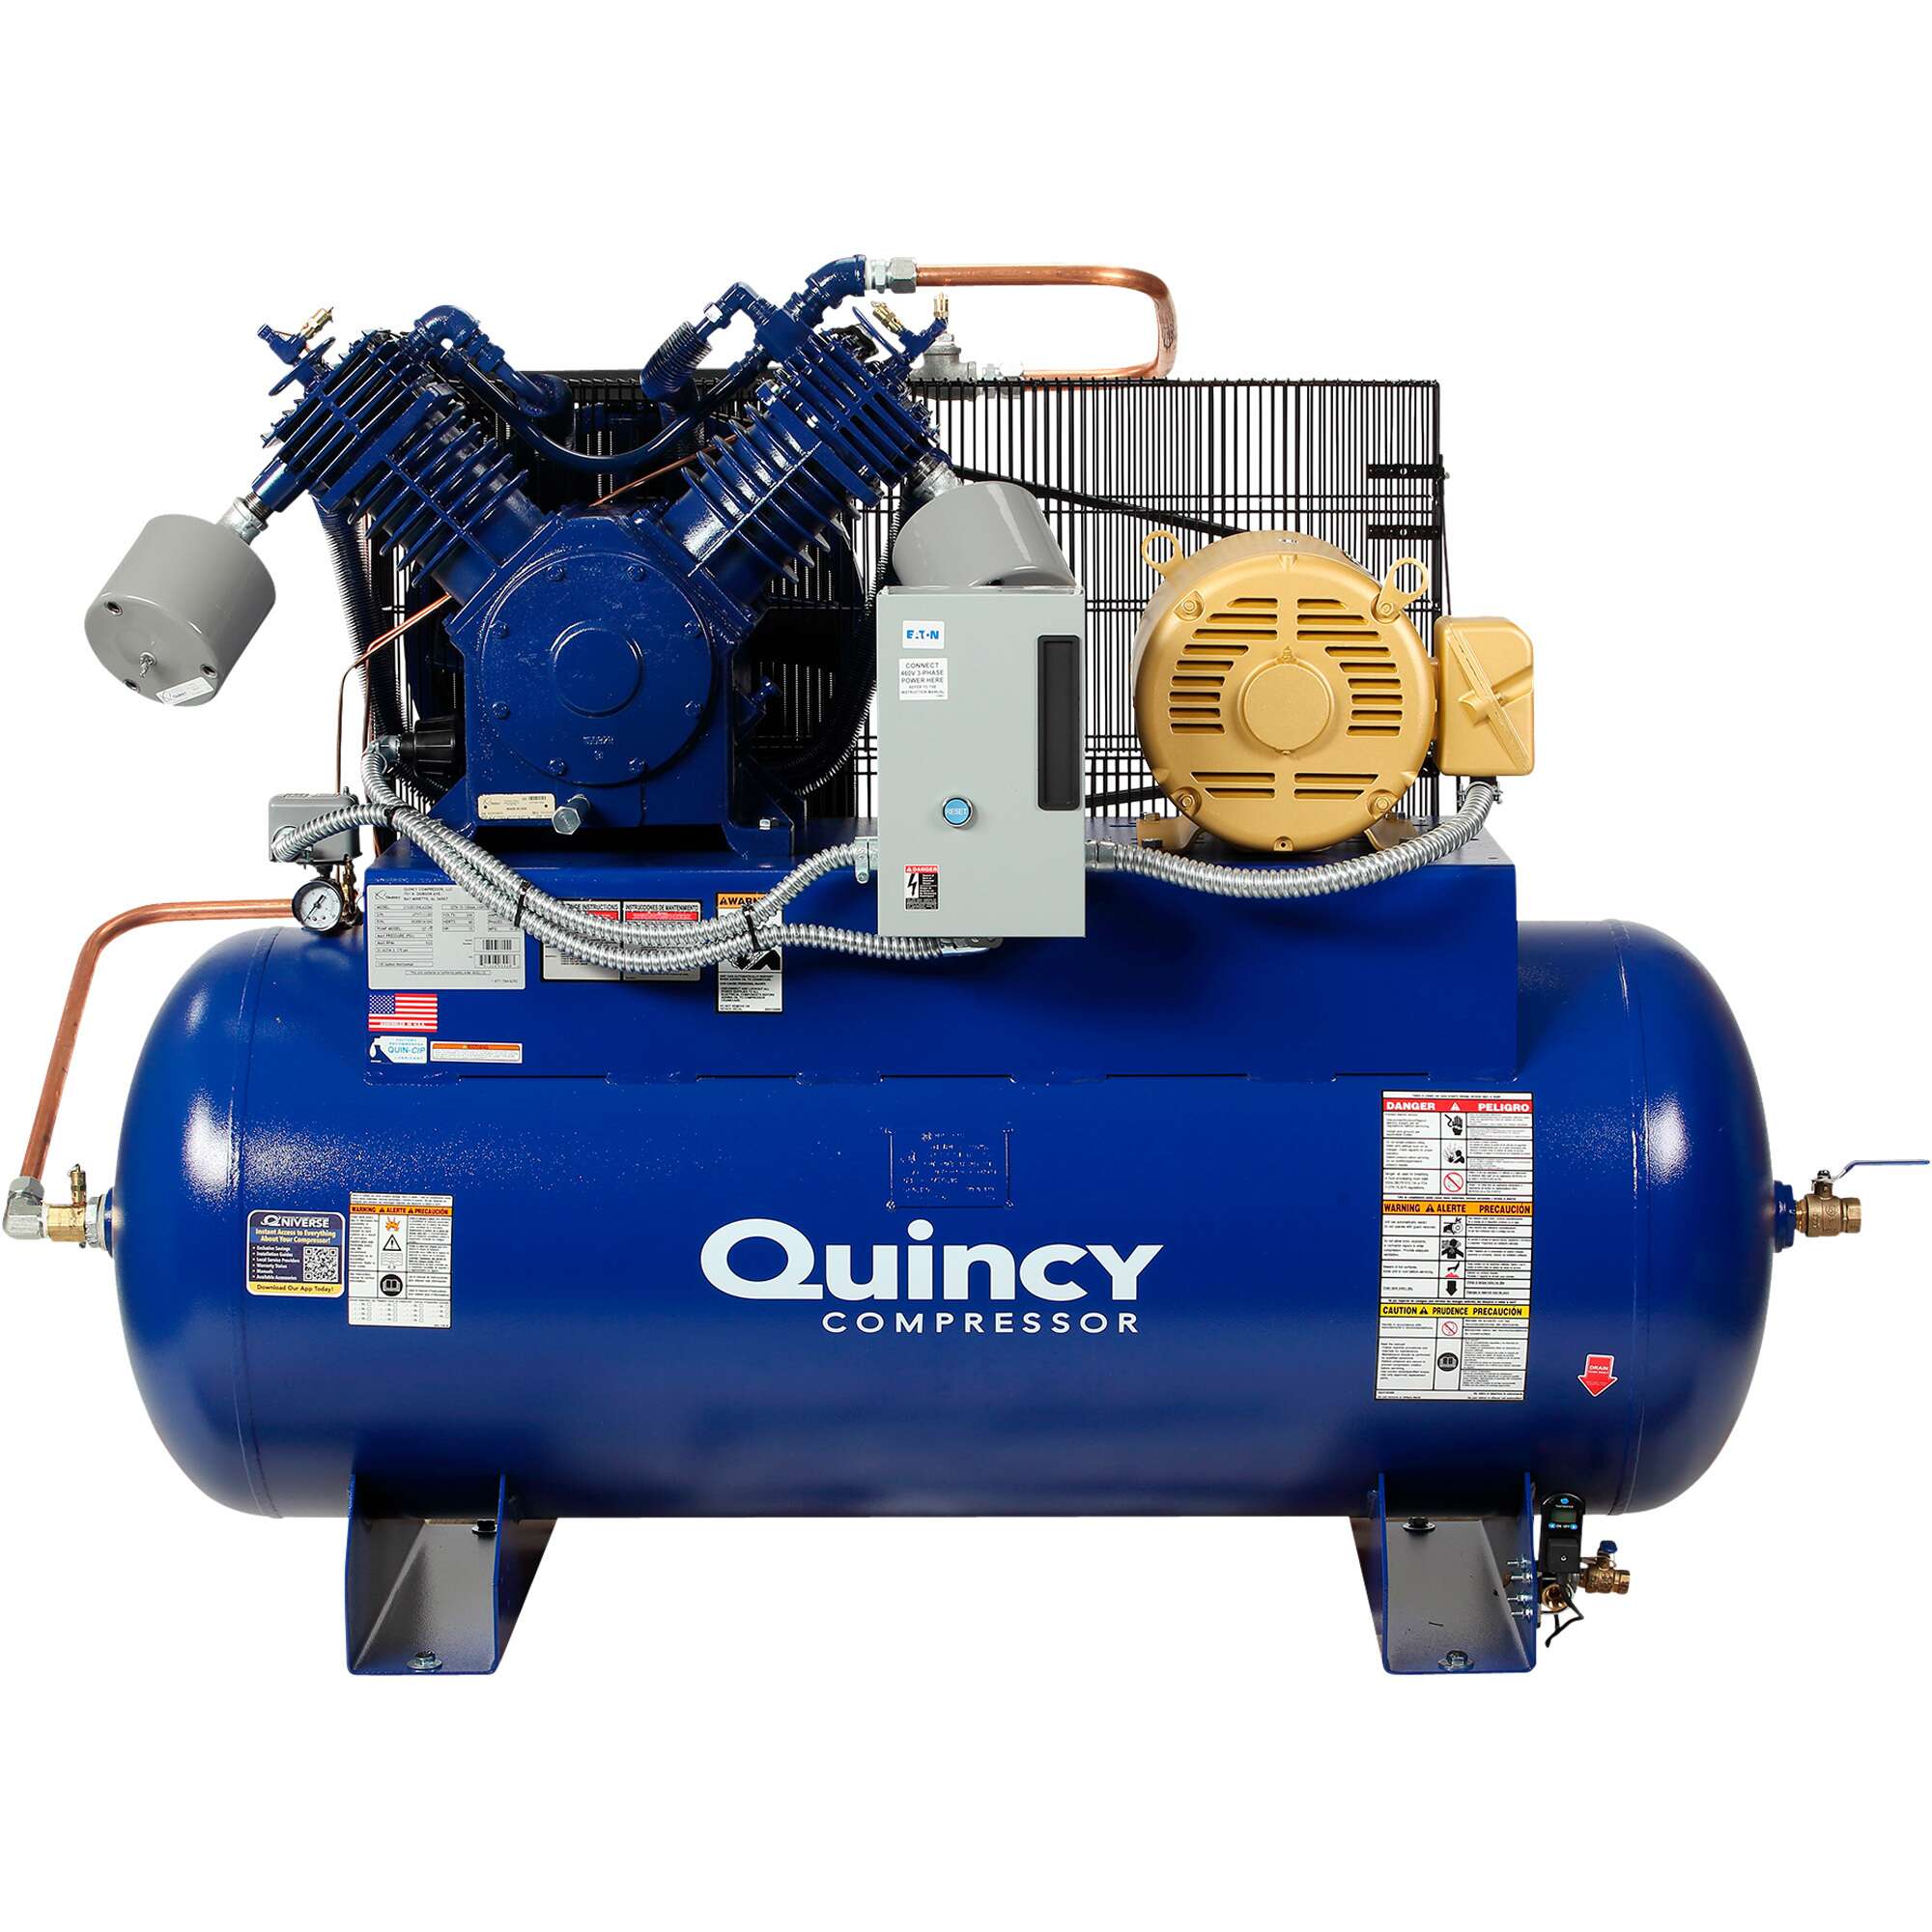 Quincy QT 15 Splash Lubricated Air Compressor with MAX Package 15 HP 460 Volt 3 Phase 120 Gallon Horizontal